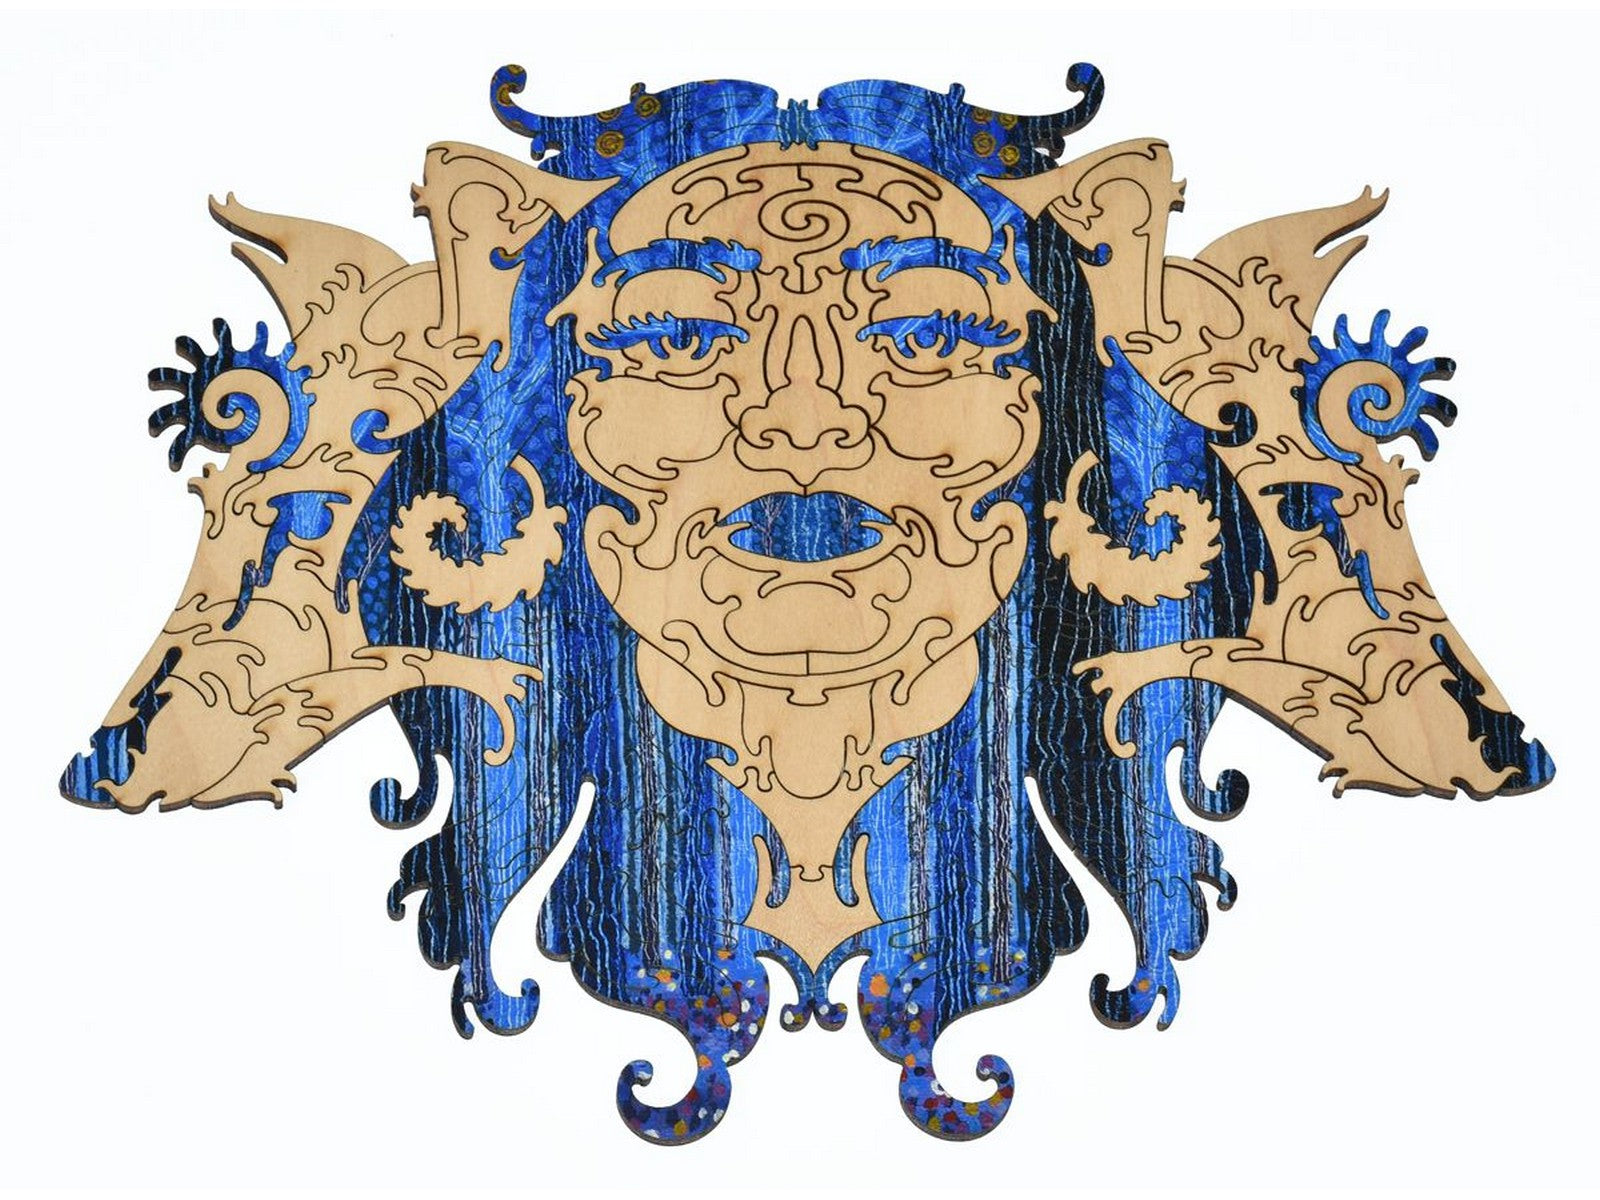 A closeup of pieces showing an alternative solution to the puzzle, Blue Forest, in the shape of a woman and wolves.